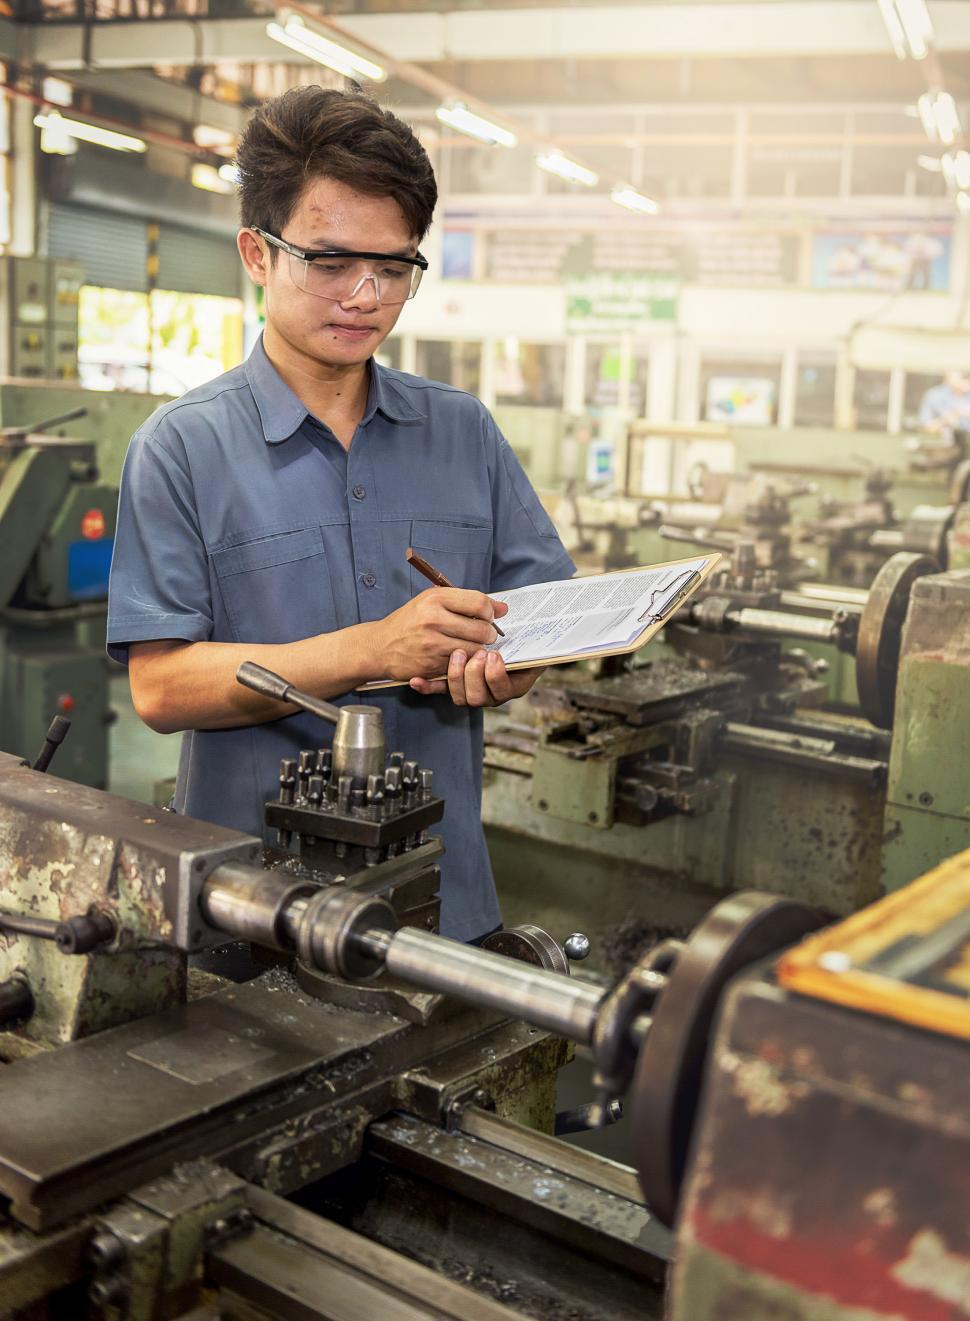 Free Image of Man Operating Machine in Factory 